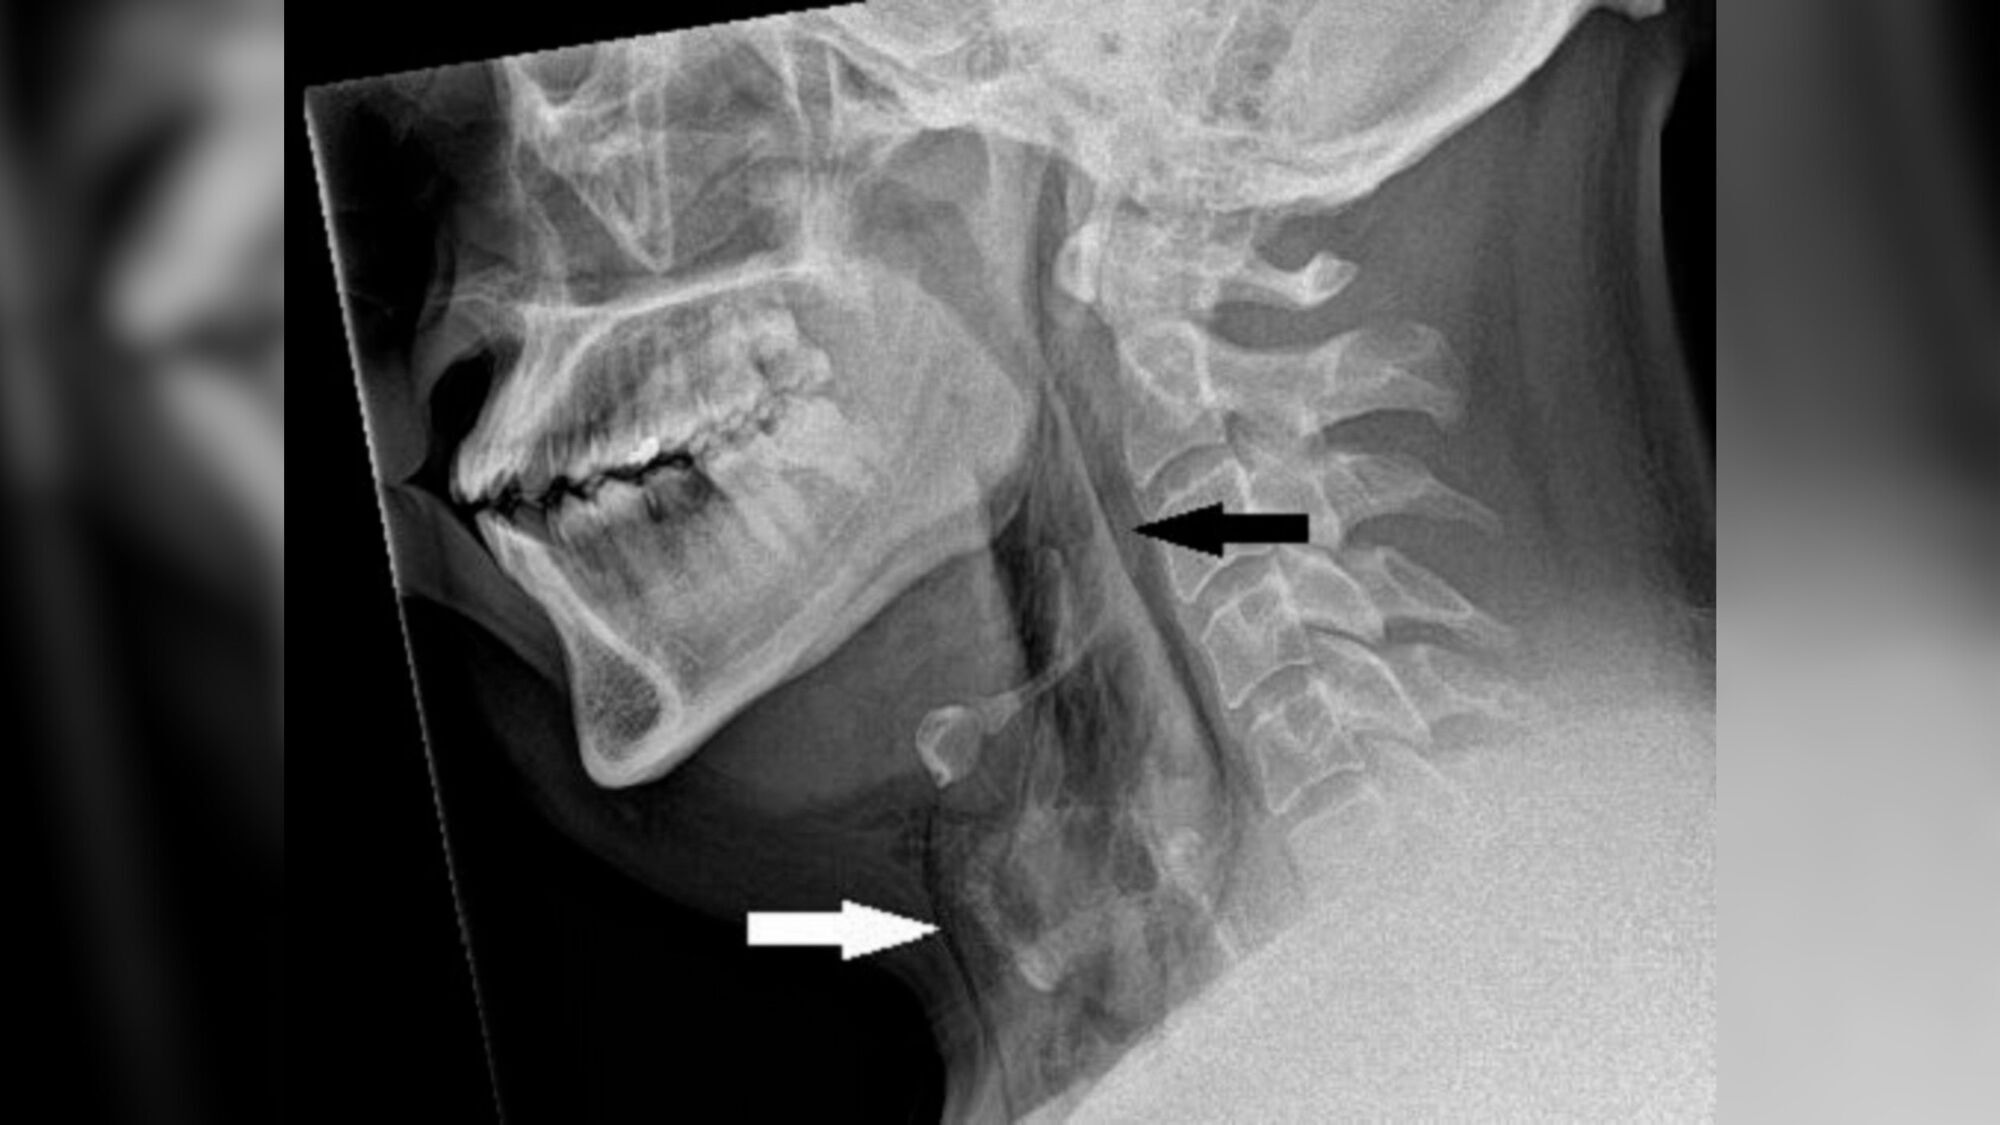 For the first time in the world, a case of tracheal rupture due to ''silent sneezing'' is recorded (photo)